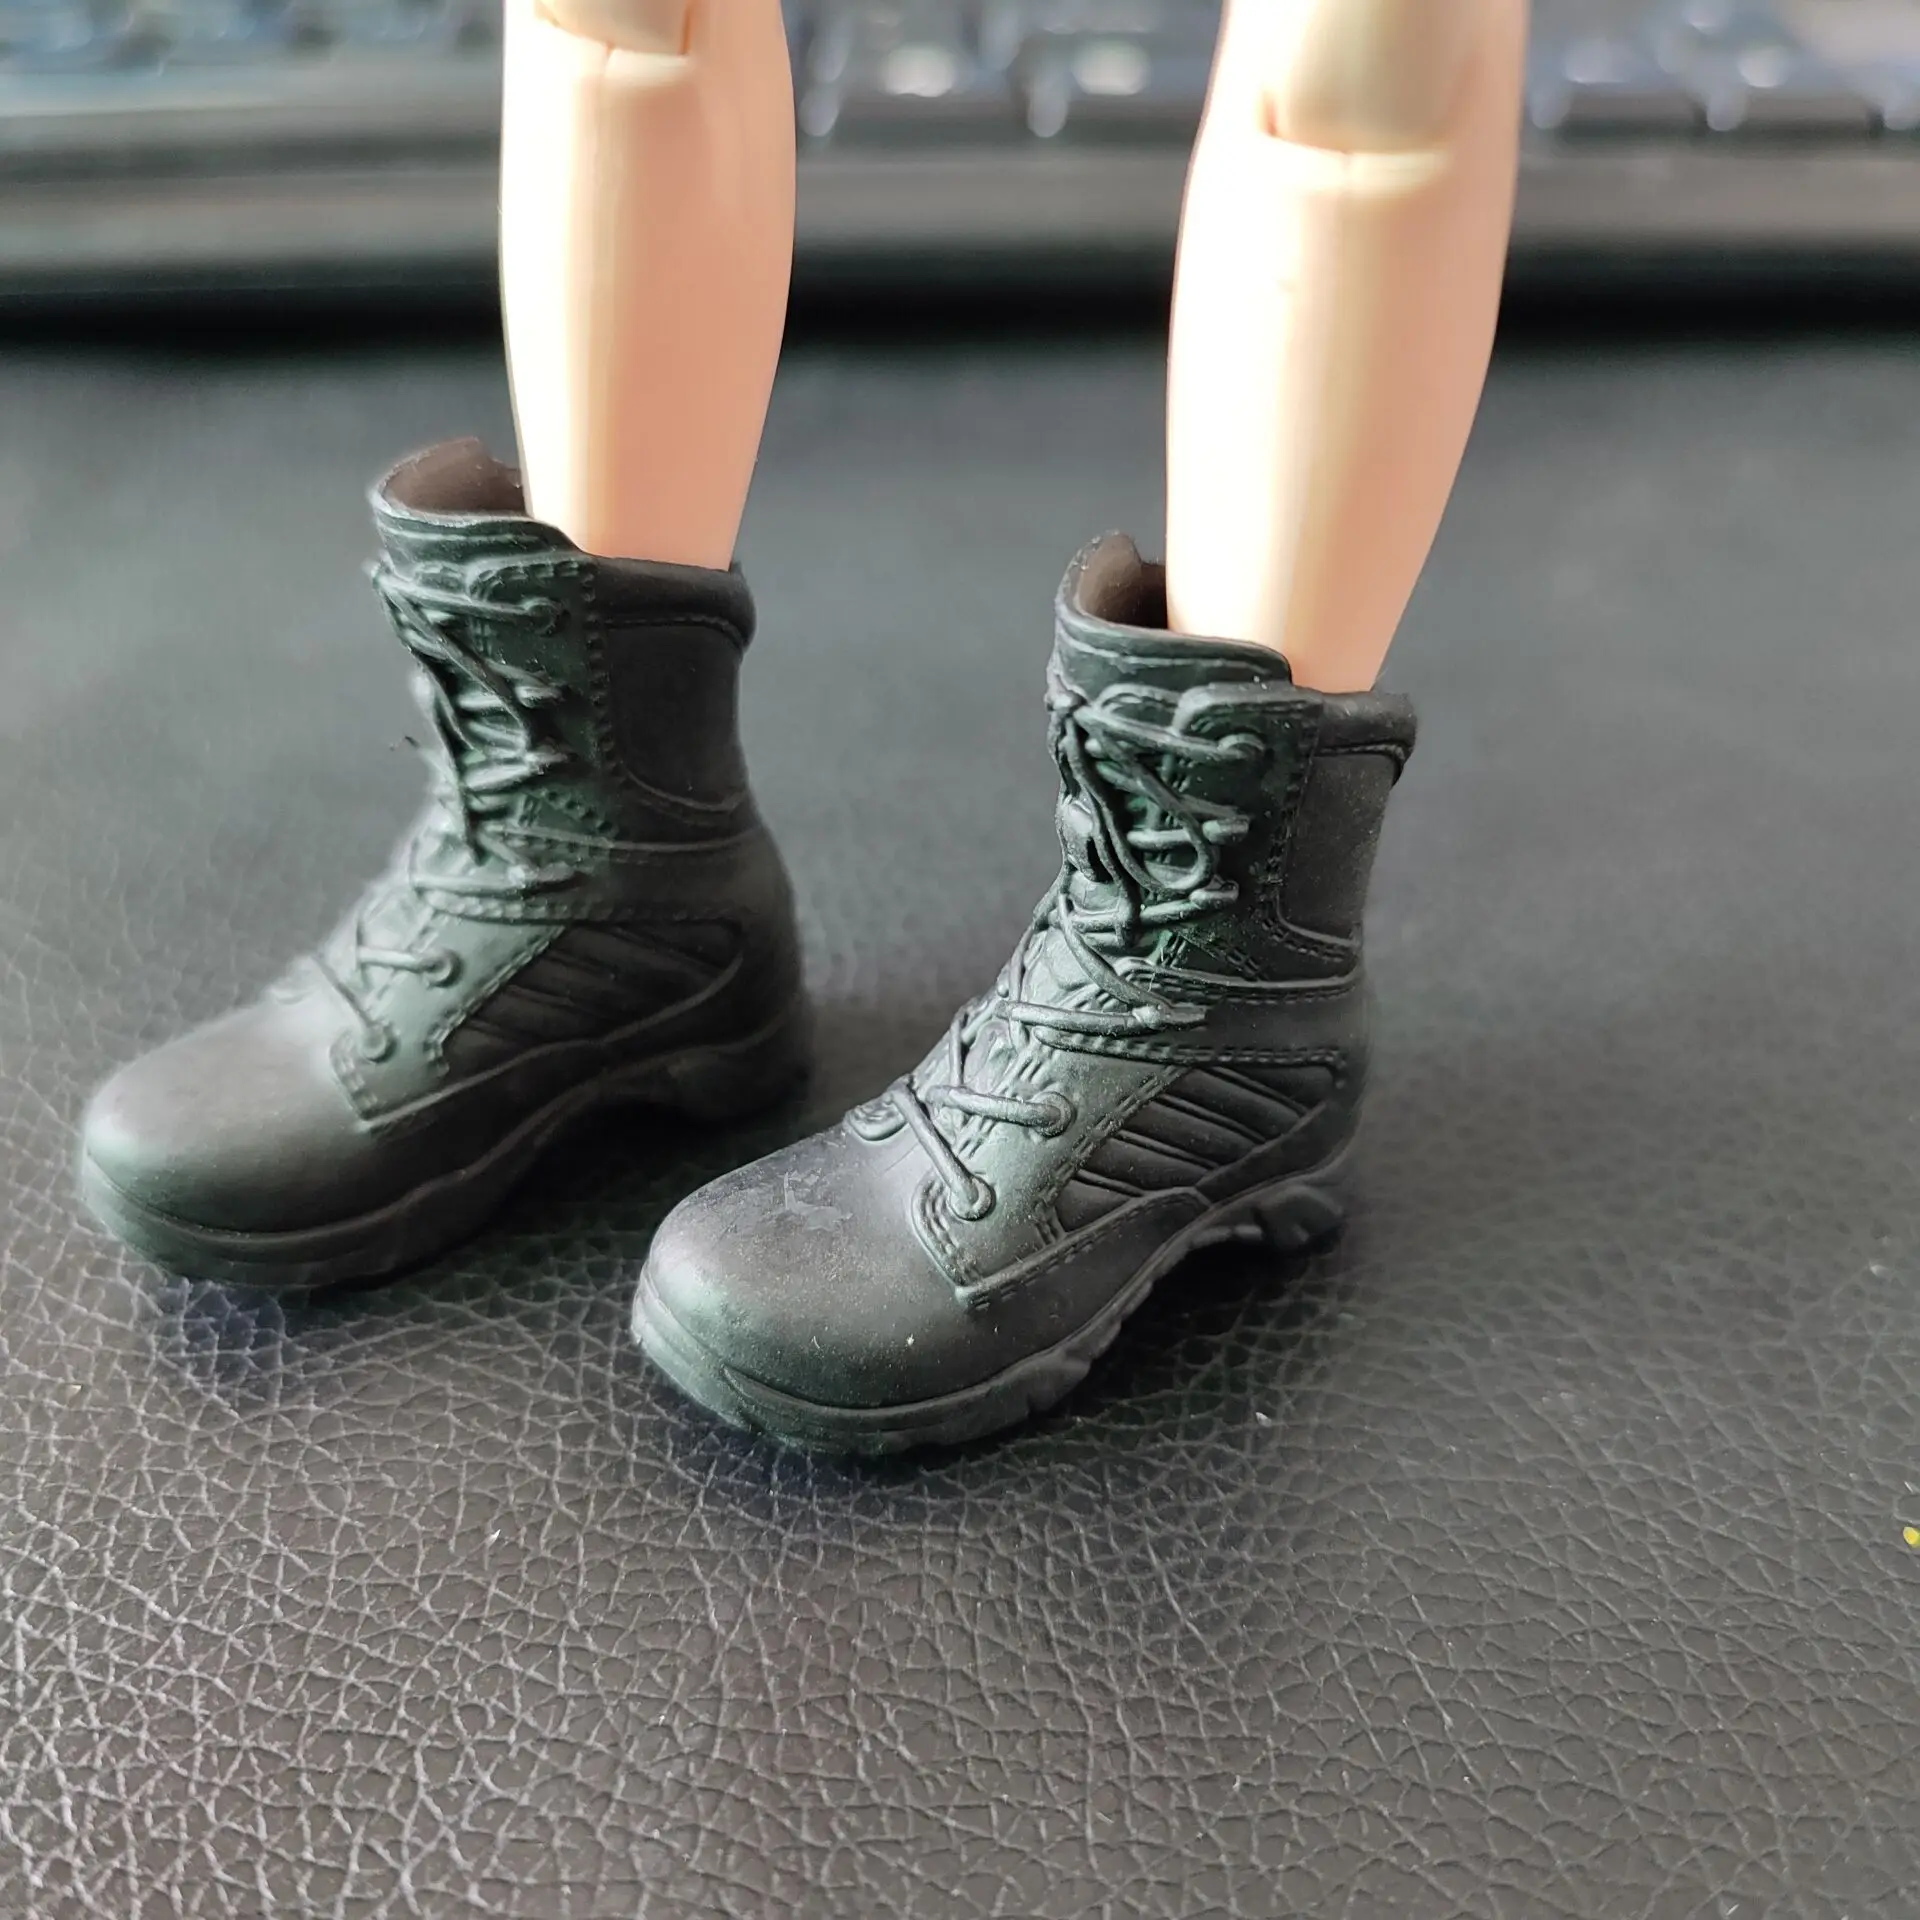 Vstoys 1/6 Female Combat Boots Policewoman Shoes Soldier Hard Rubber Boots  Fit 12Inch Articulating Body Action Figure In Store